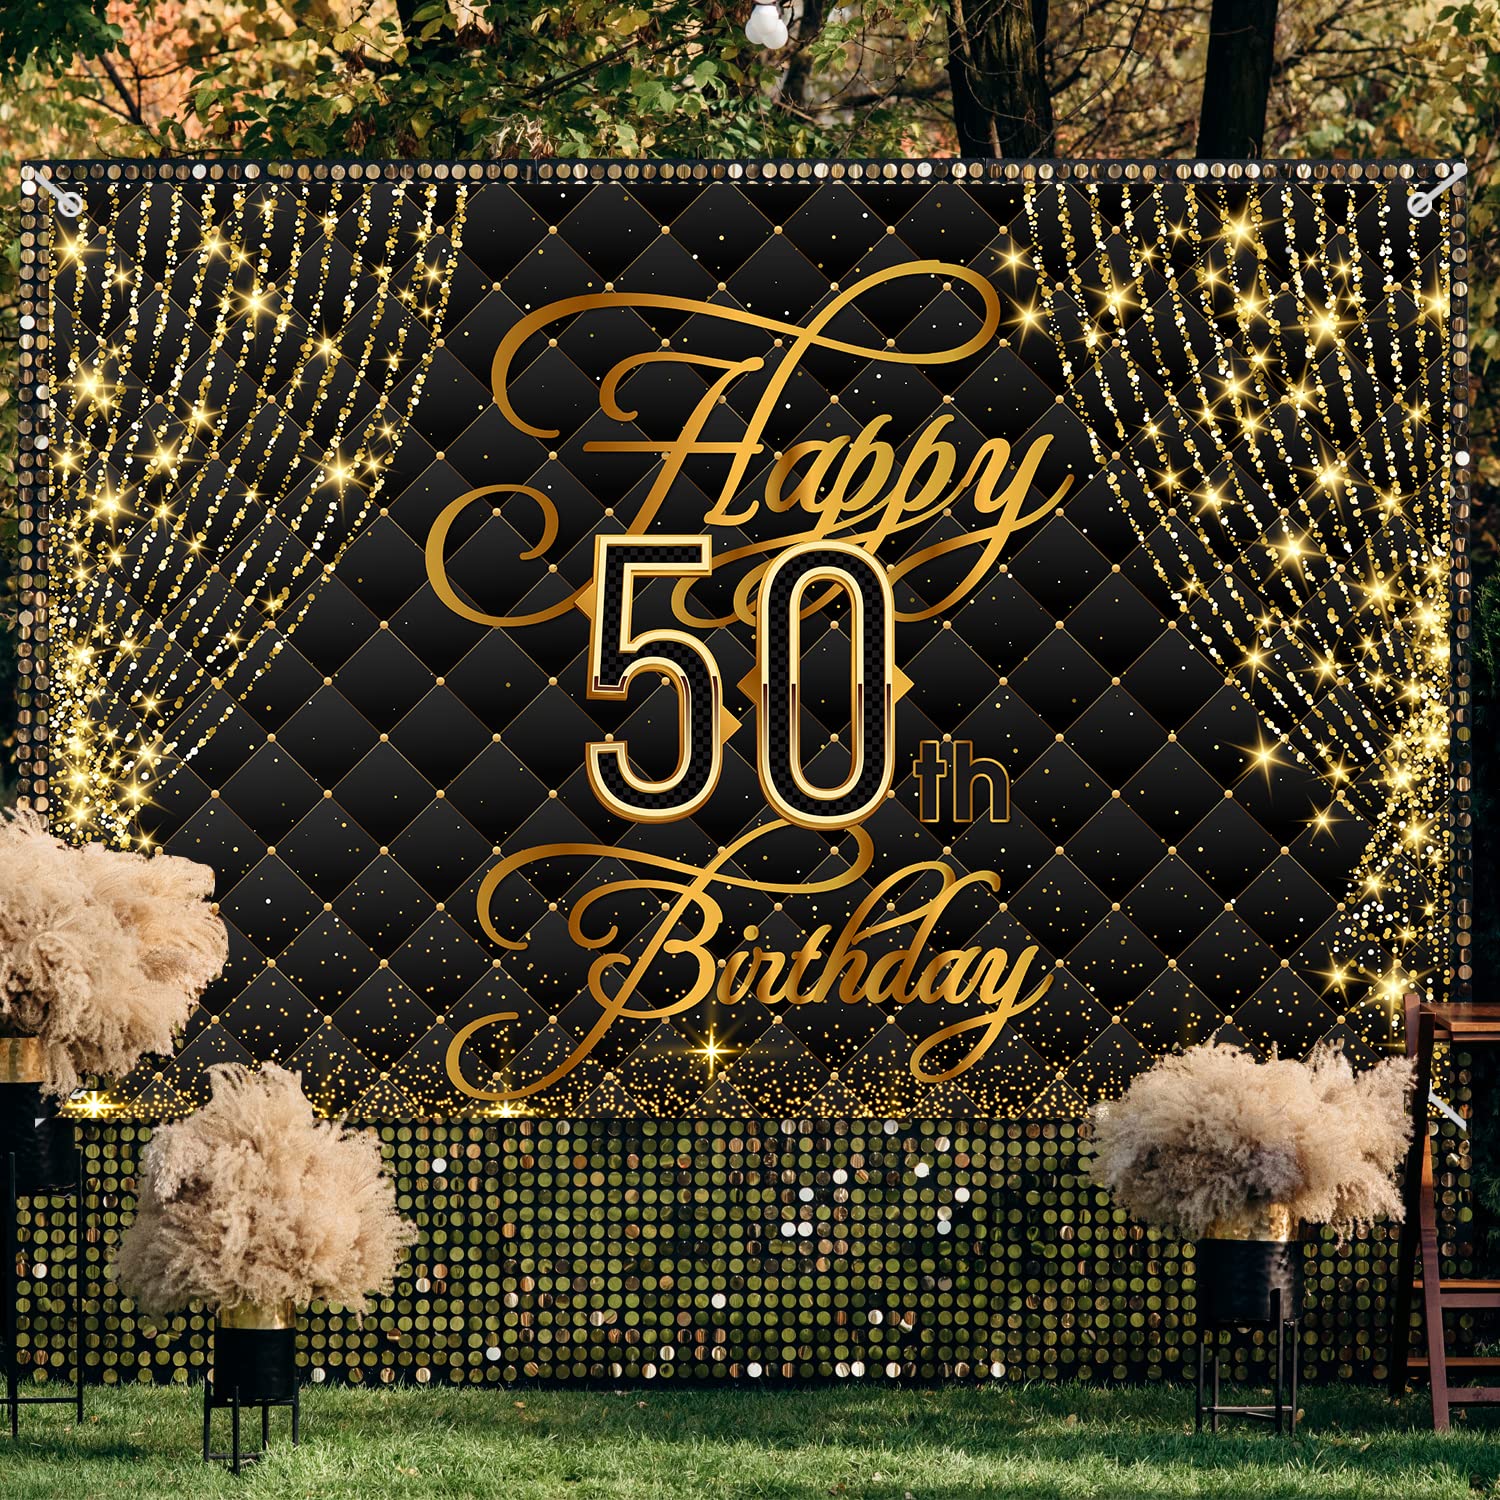 Happy 50th Birthday Banner Backdrop Royal Curtain Decorations Black Gold Background 50 Years Old Bday for Women Men Photography Party Decor Supplies